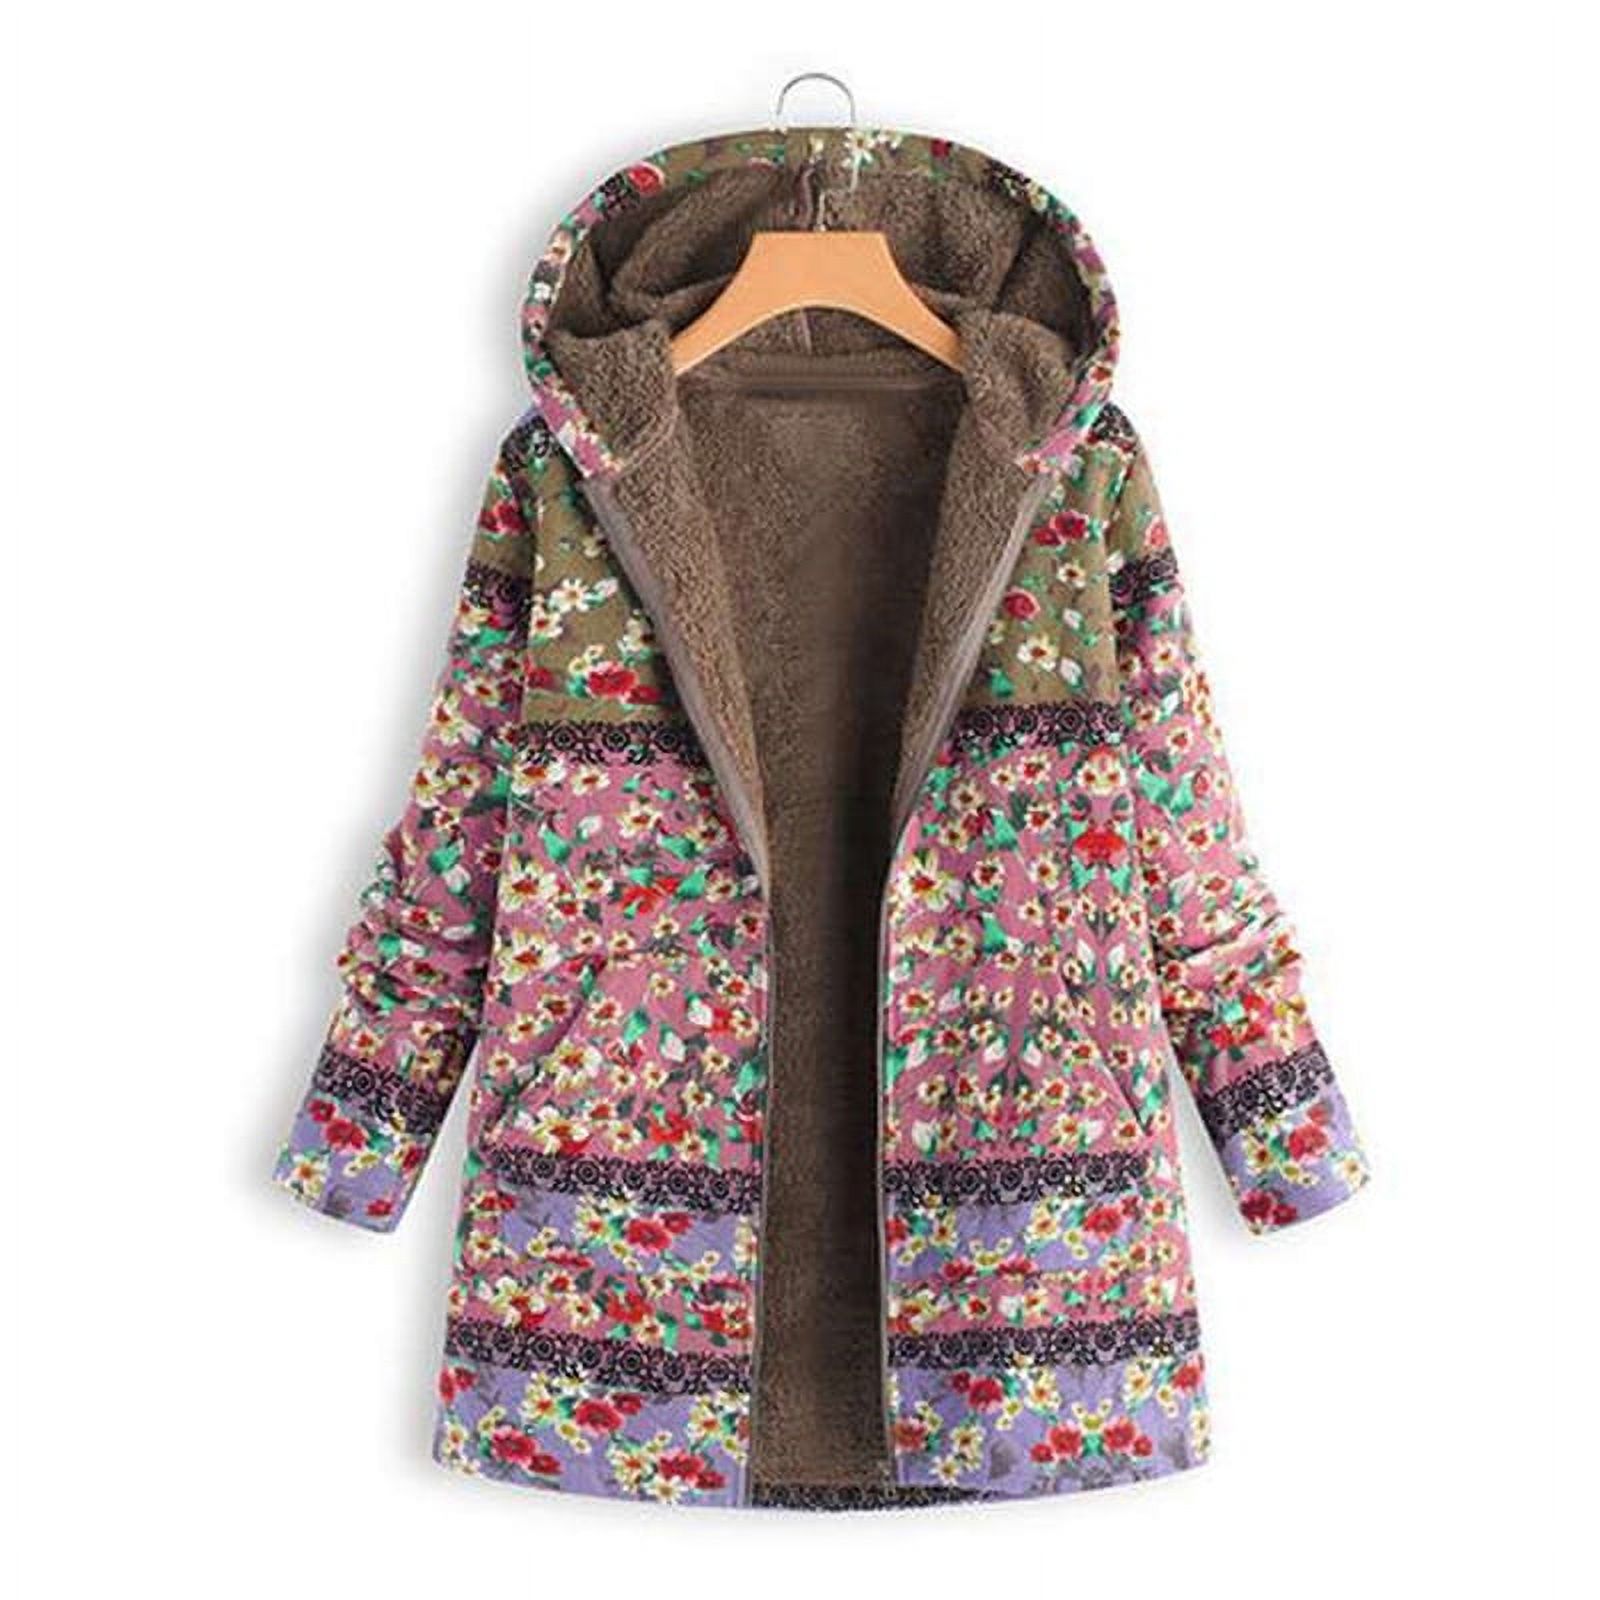 Women Winter Down Coat Printed Hooded Pockets Warm Fleece Floral Button Down Coat Jacket - image 1 of 1